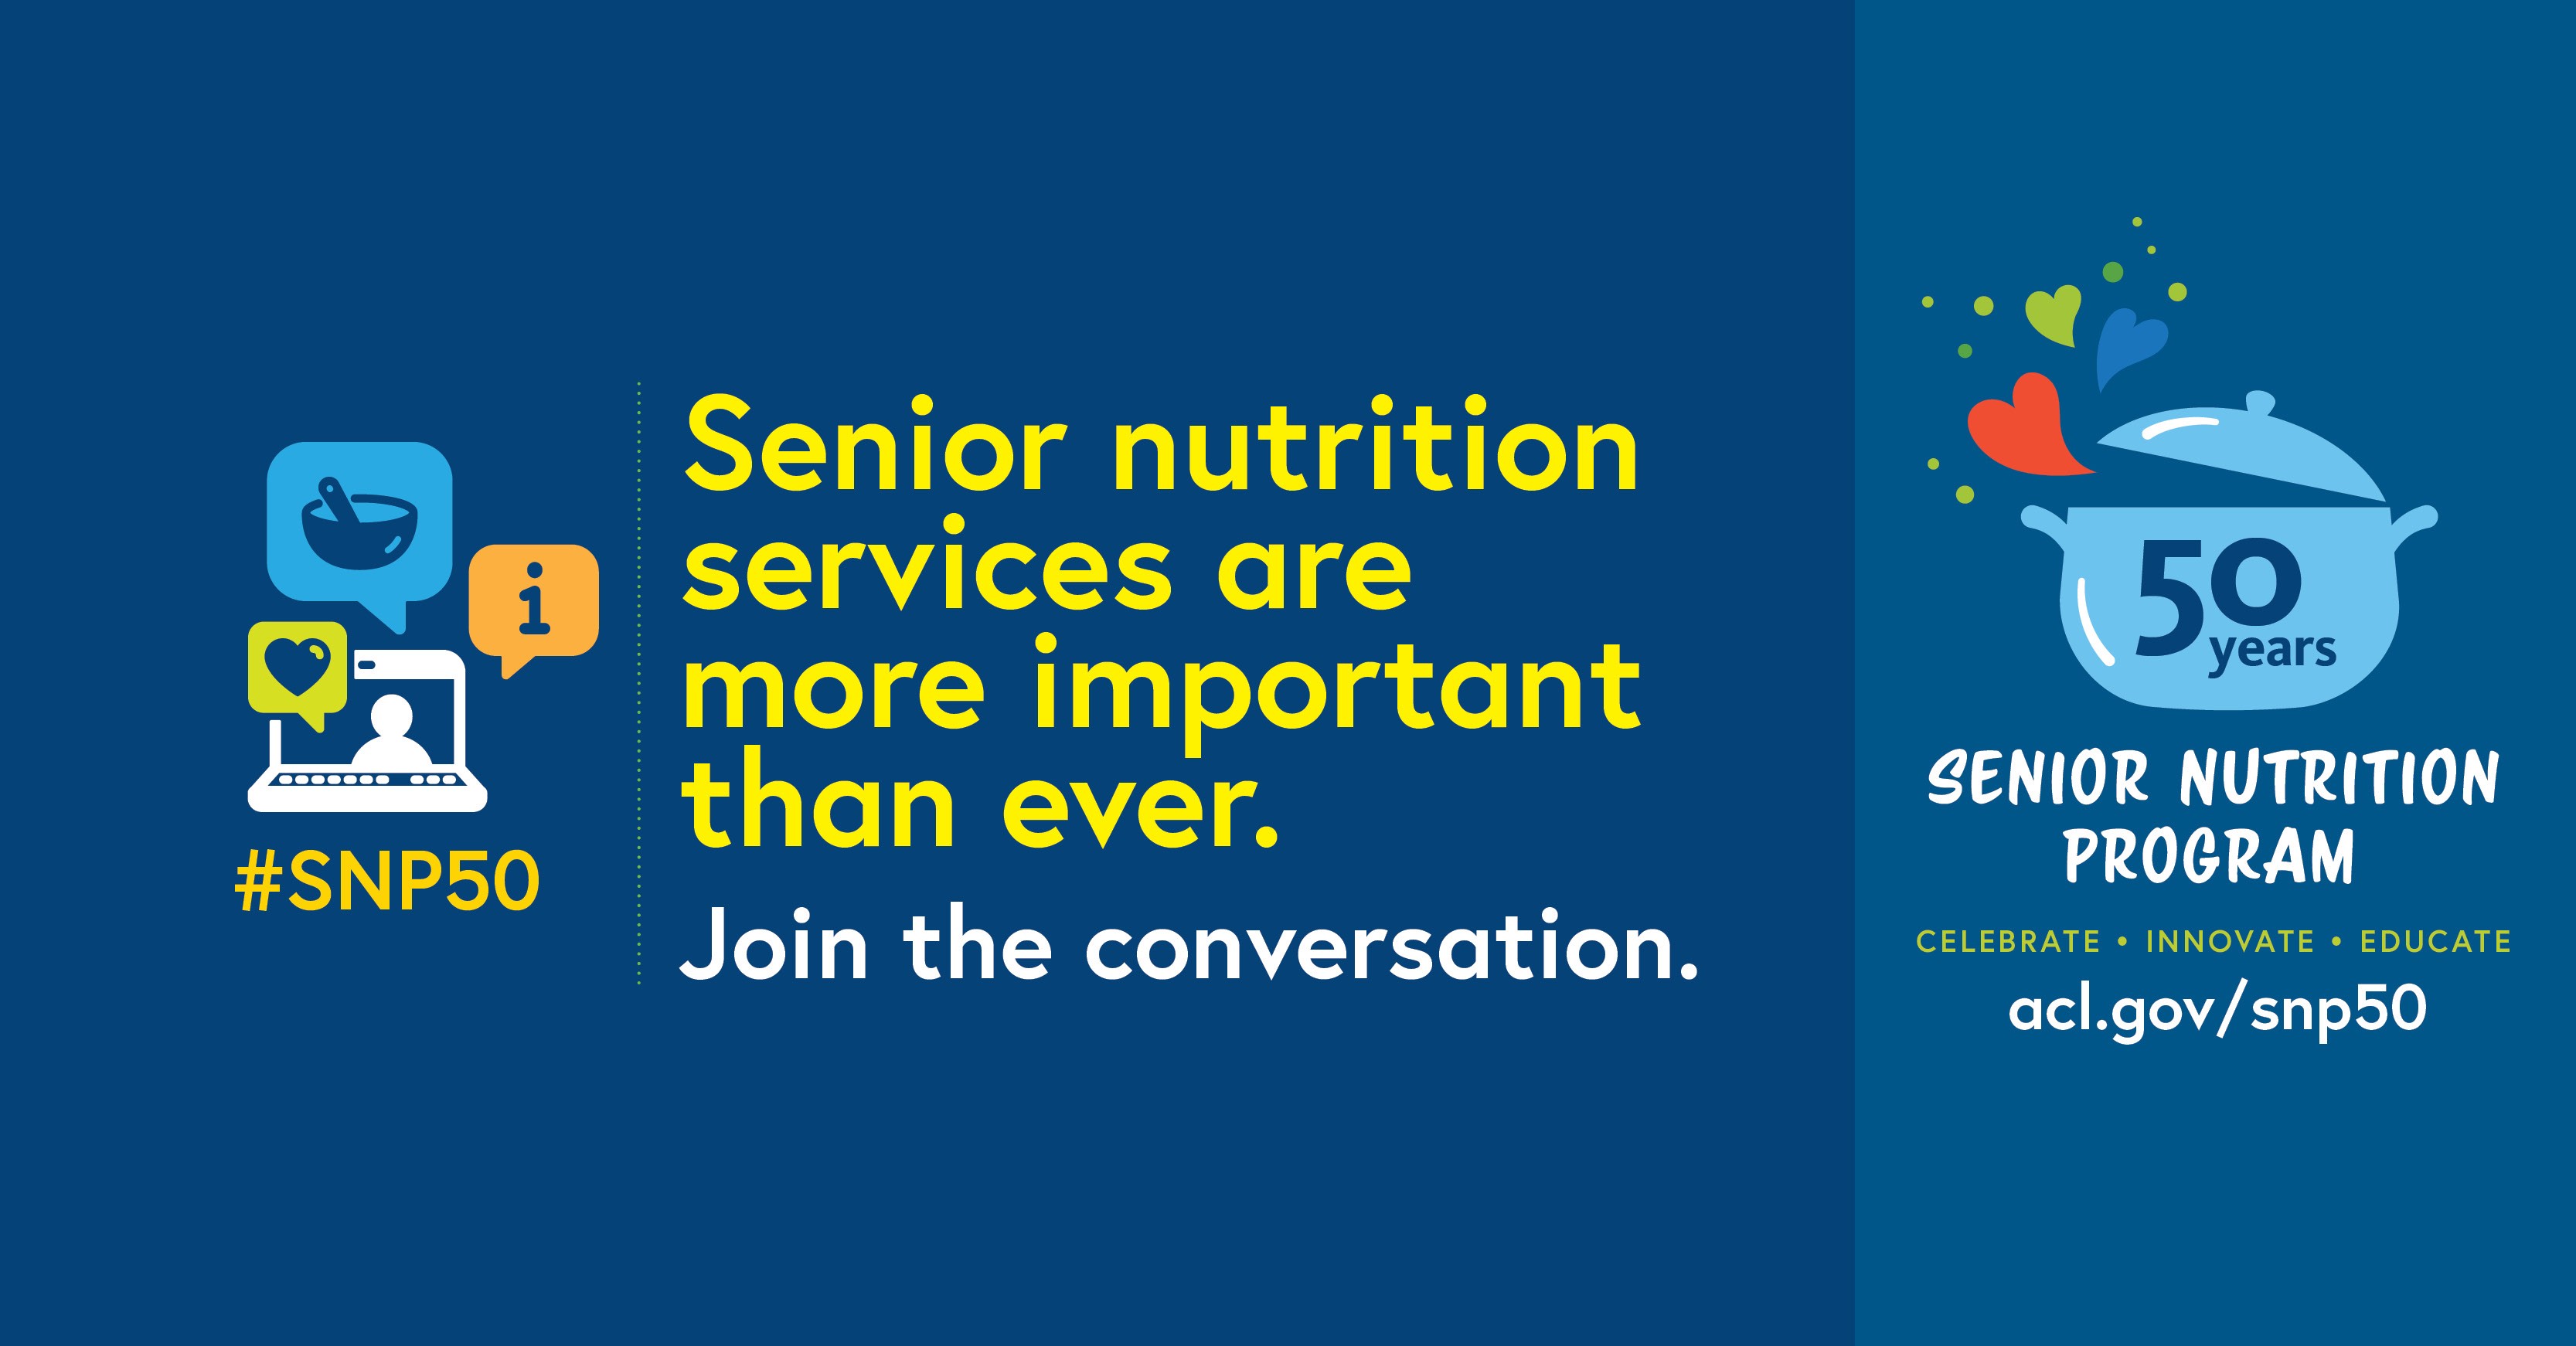 Social Graphic: Senior nutrition services are more important than ever. Join the conversation. 50 years. Senior Nutrition Program. Celebrate. Innovate. Educate. acl.gov/snp50 #SNP50